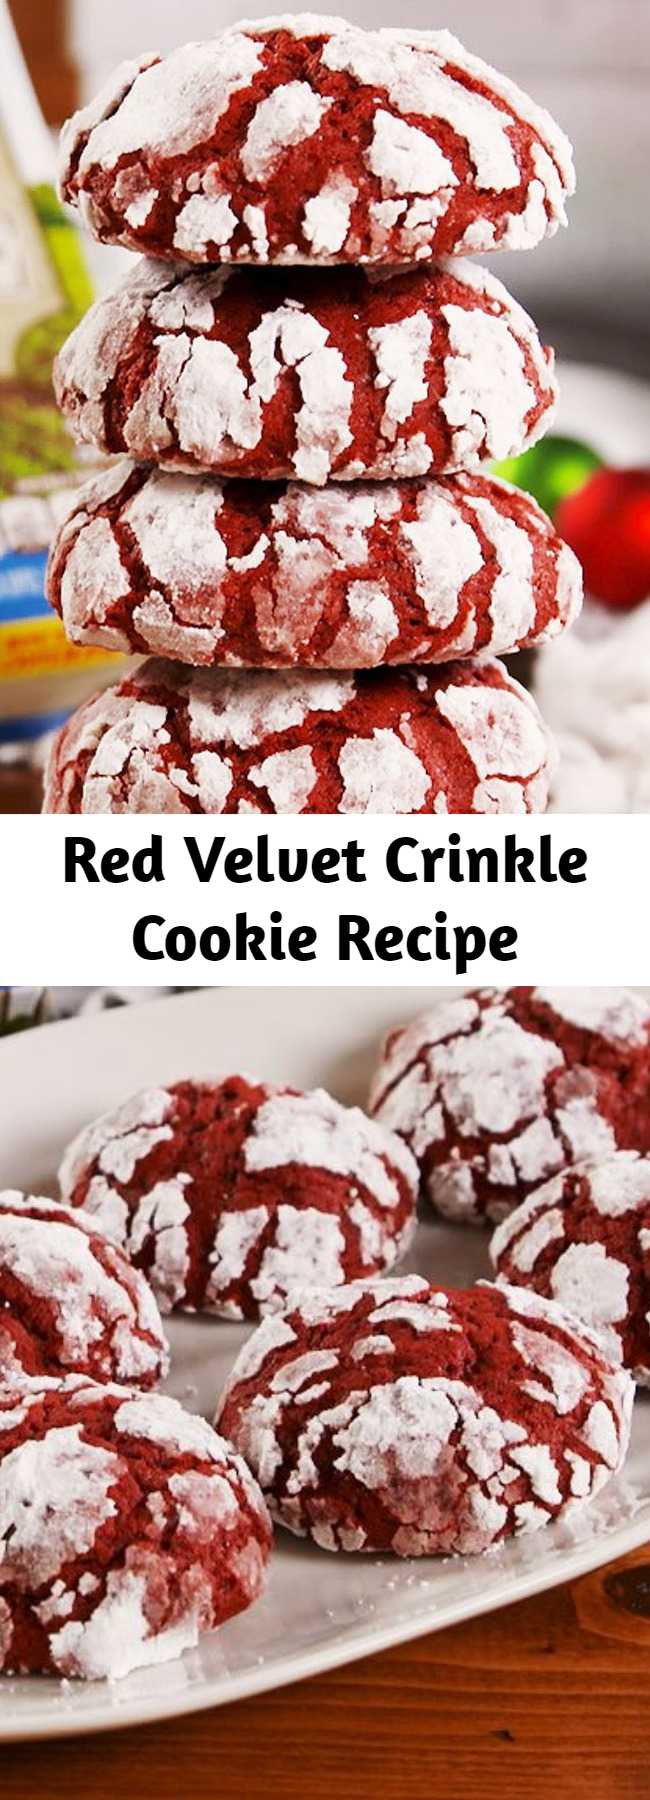 Red Velvet Crinkle Cookie Recipe - These Red Velvet Crinkle Cookies won't only taste delicious but they will look totally adorable and absolutely festive! And getting that signature crinkle look is as simple as rolling in powdered sugar. This is a perfect dessert to add to your holiday menu.